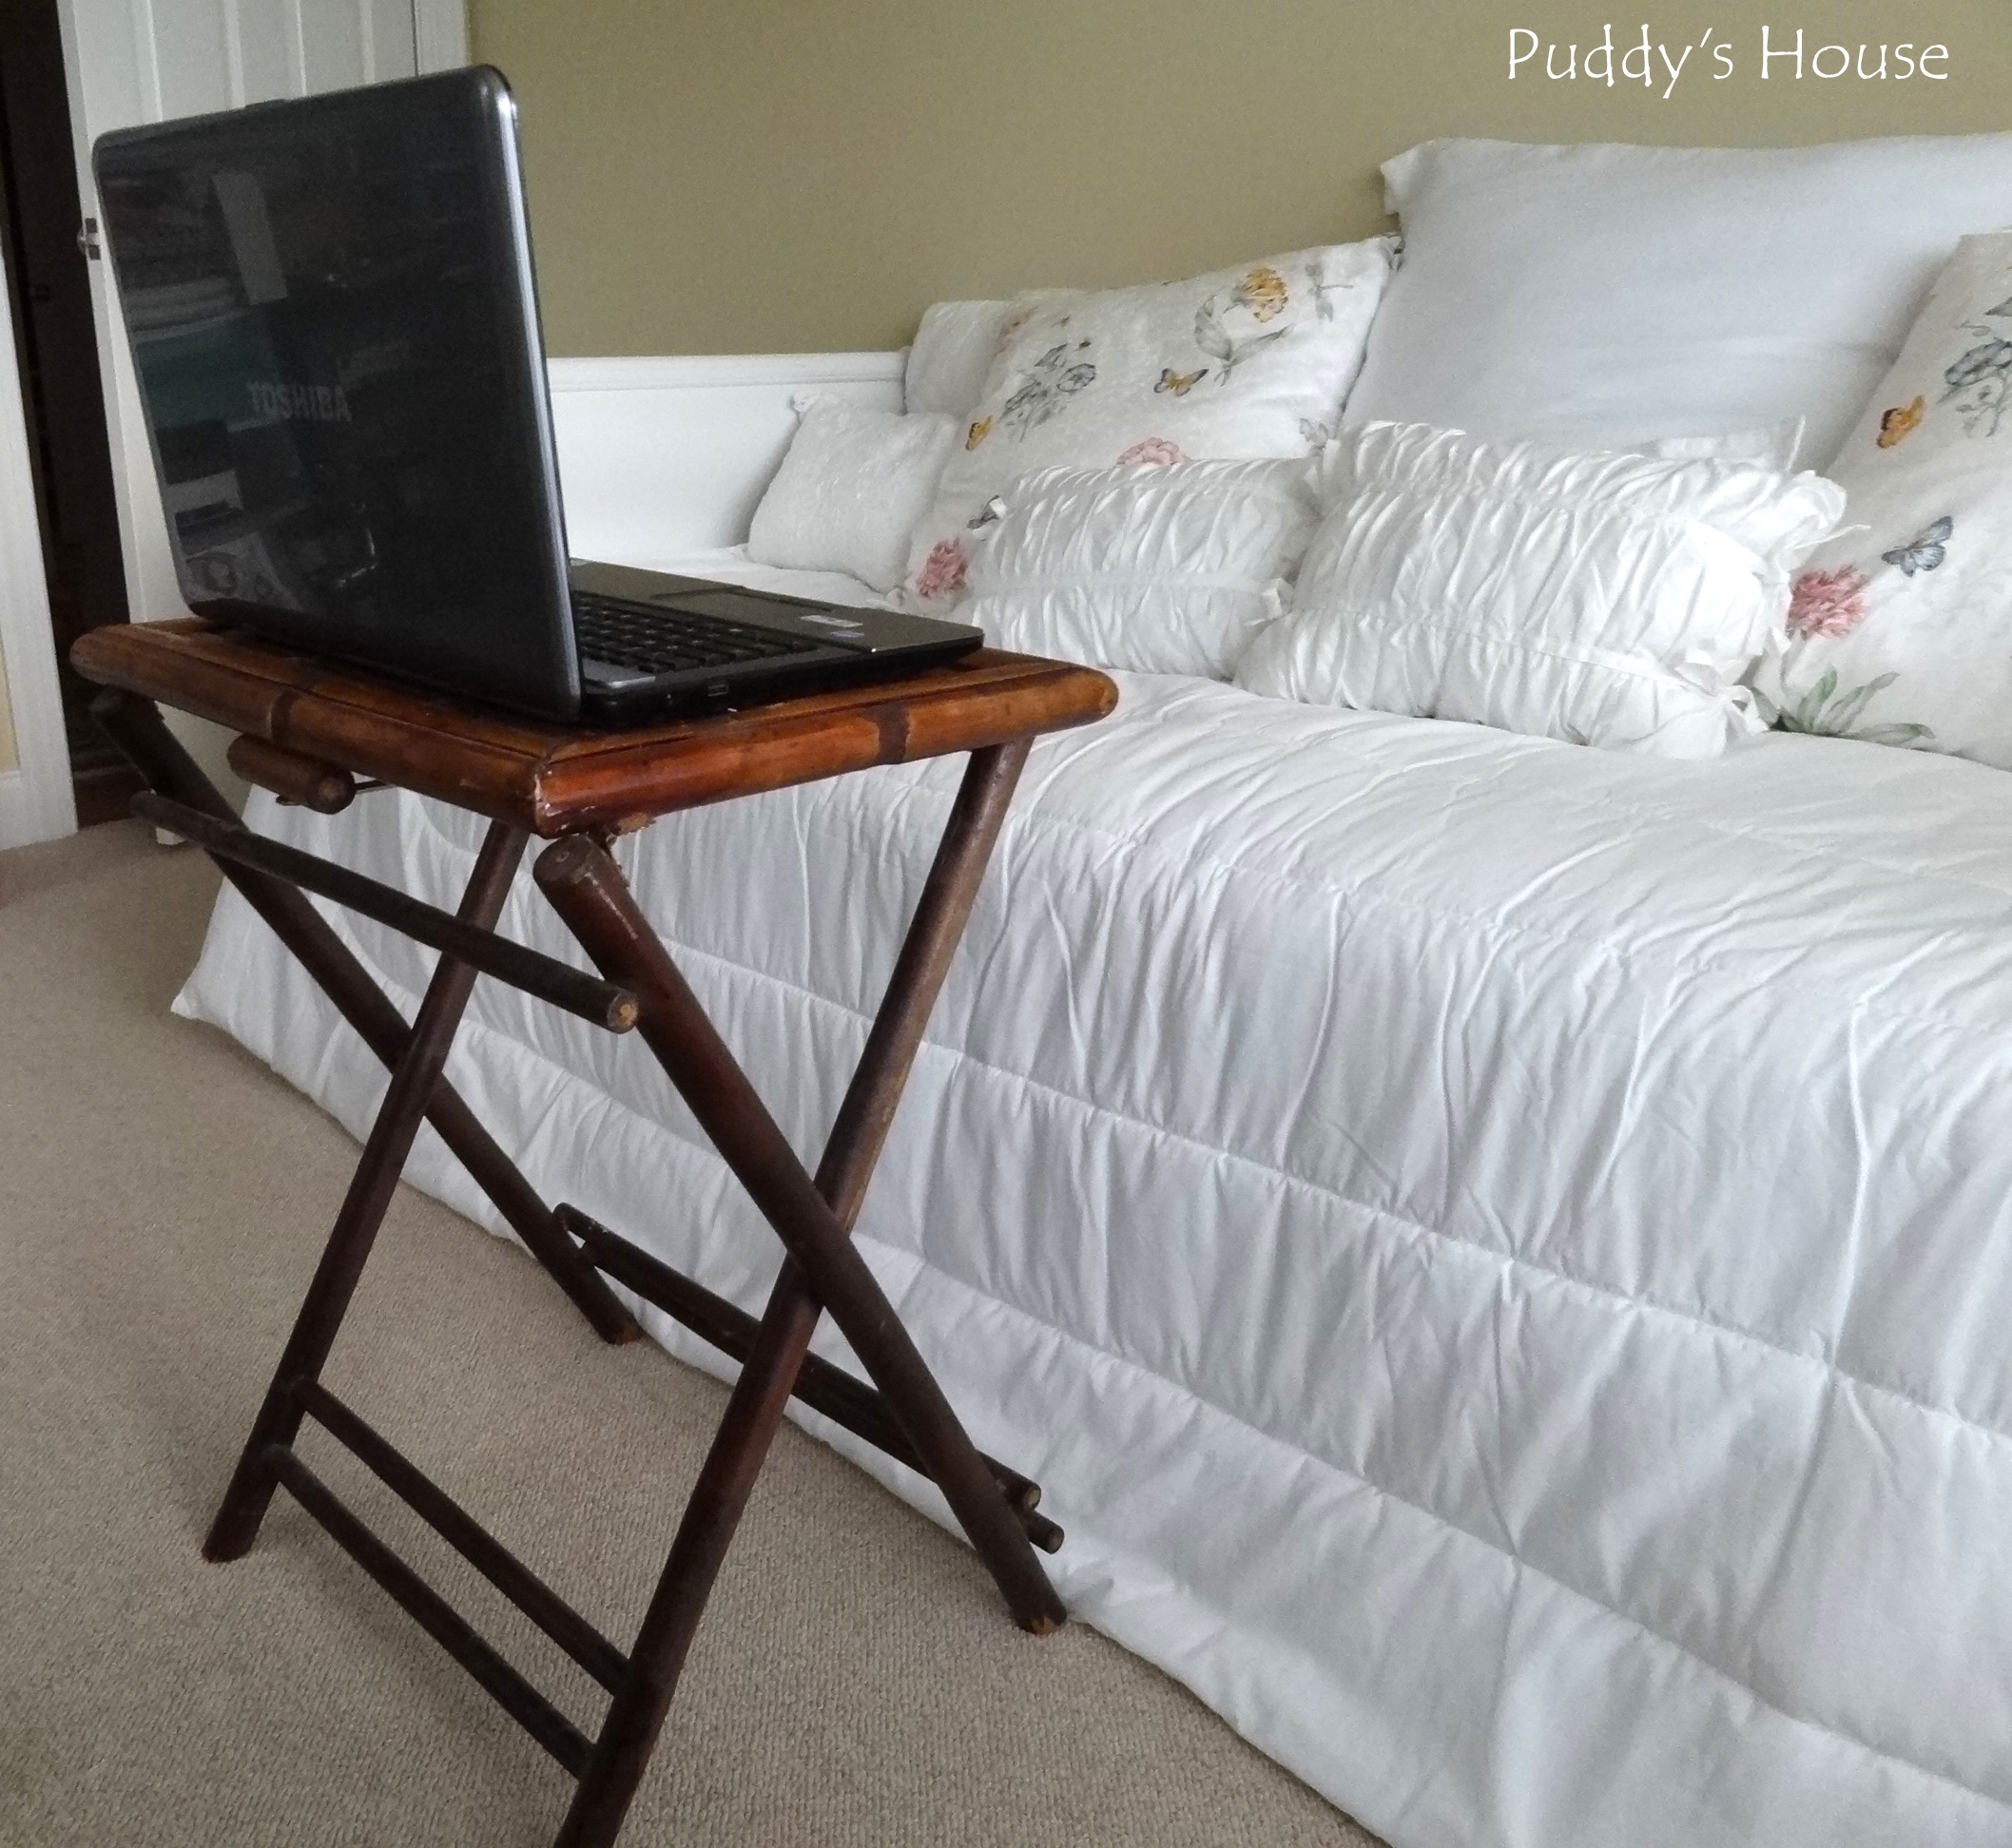 Thrift Shopping - Bambo tray Table - use for laptop